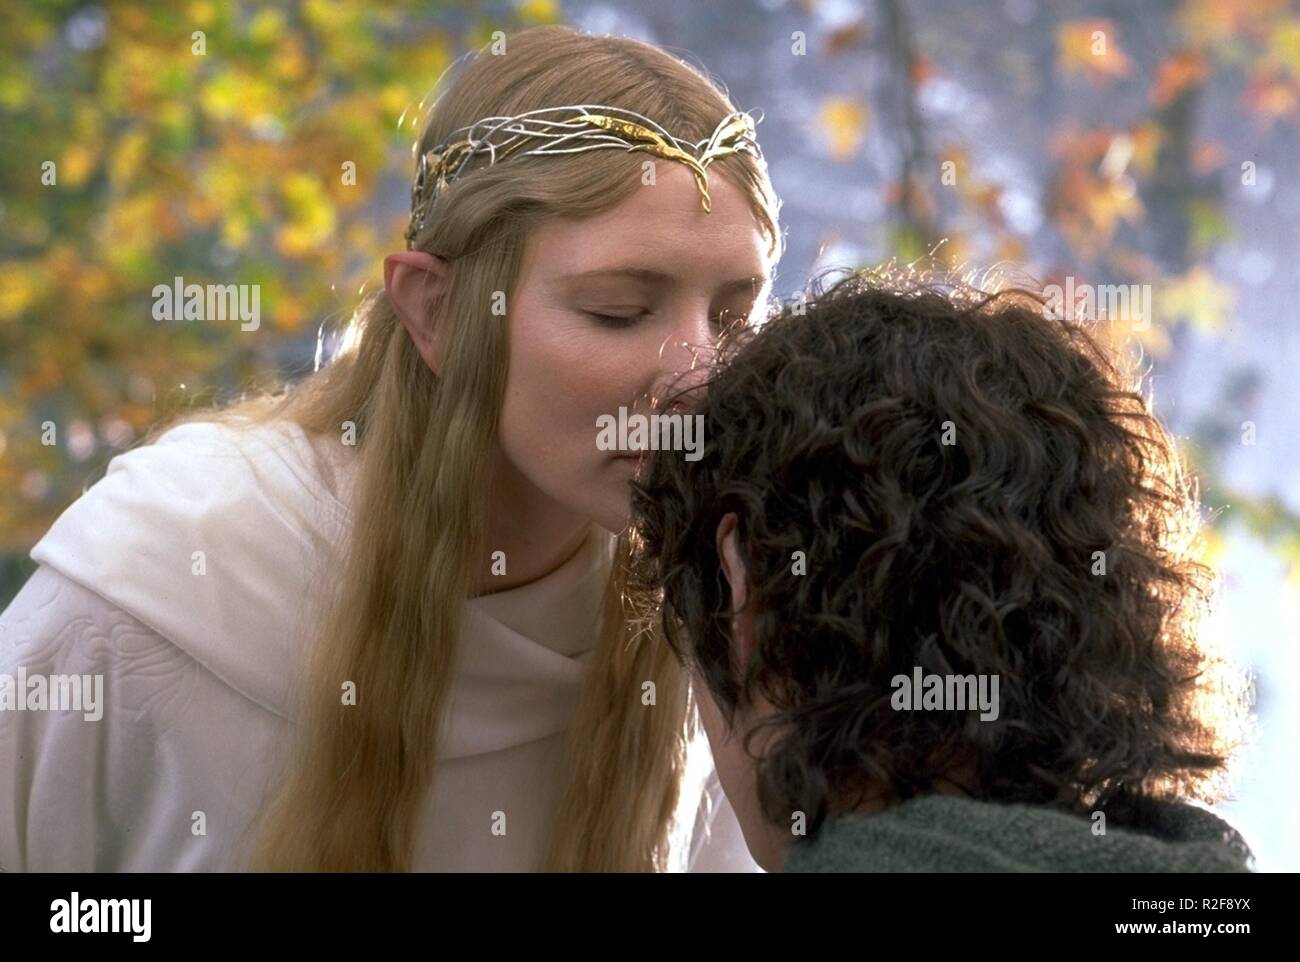 The Lord of the Rings : The Fellowship of the Ring Stock Photo - Alamy